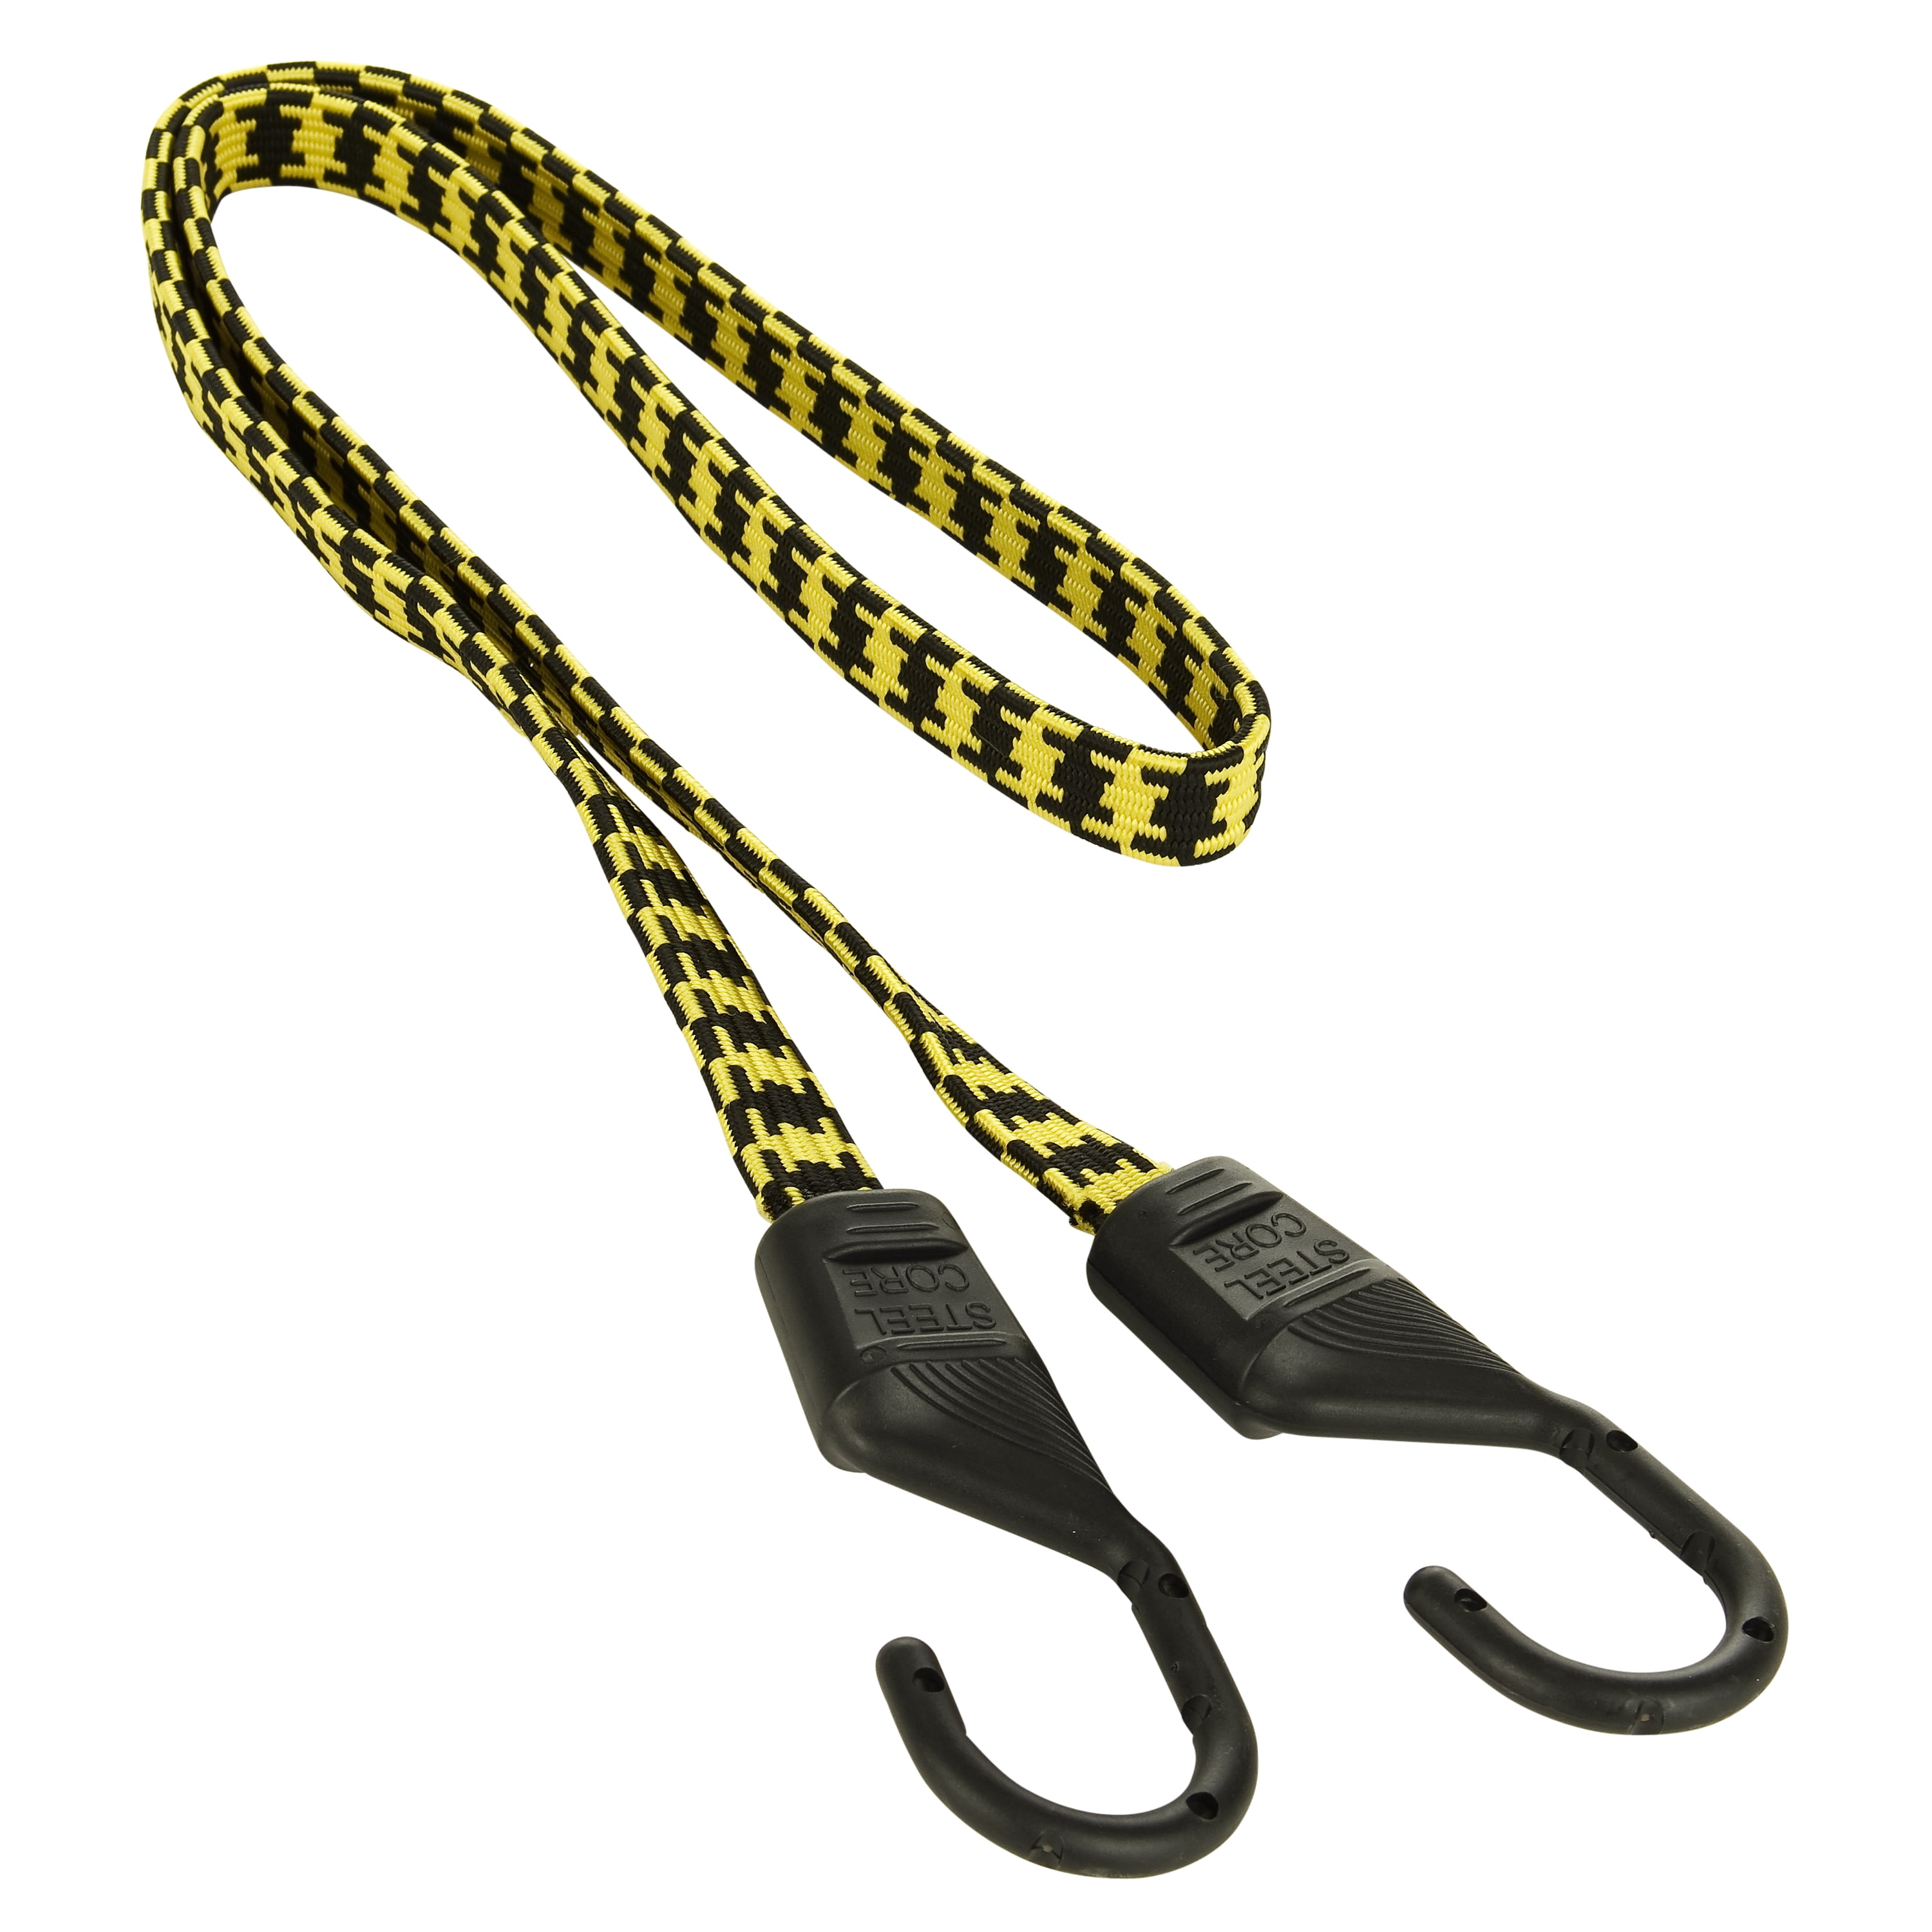 4 HYPER Tough 8 Count 48 in Heavy Duty Bungee Cords Tie Downs Black for sale online 